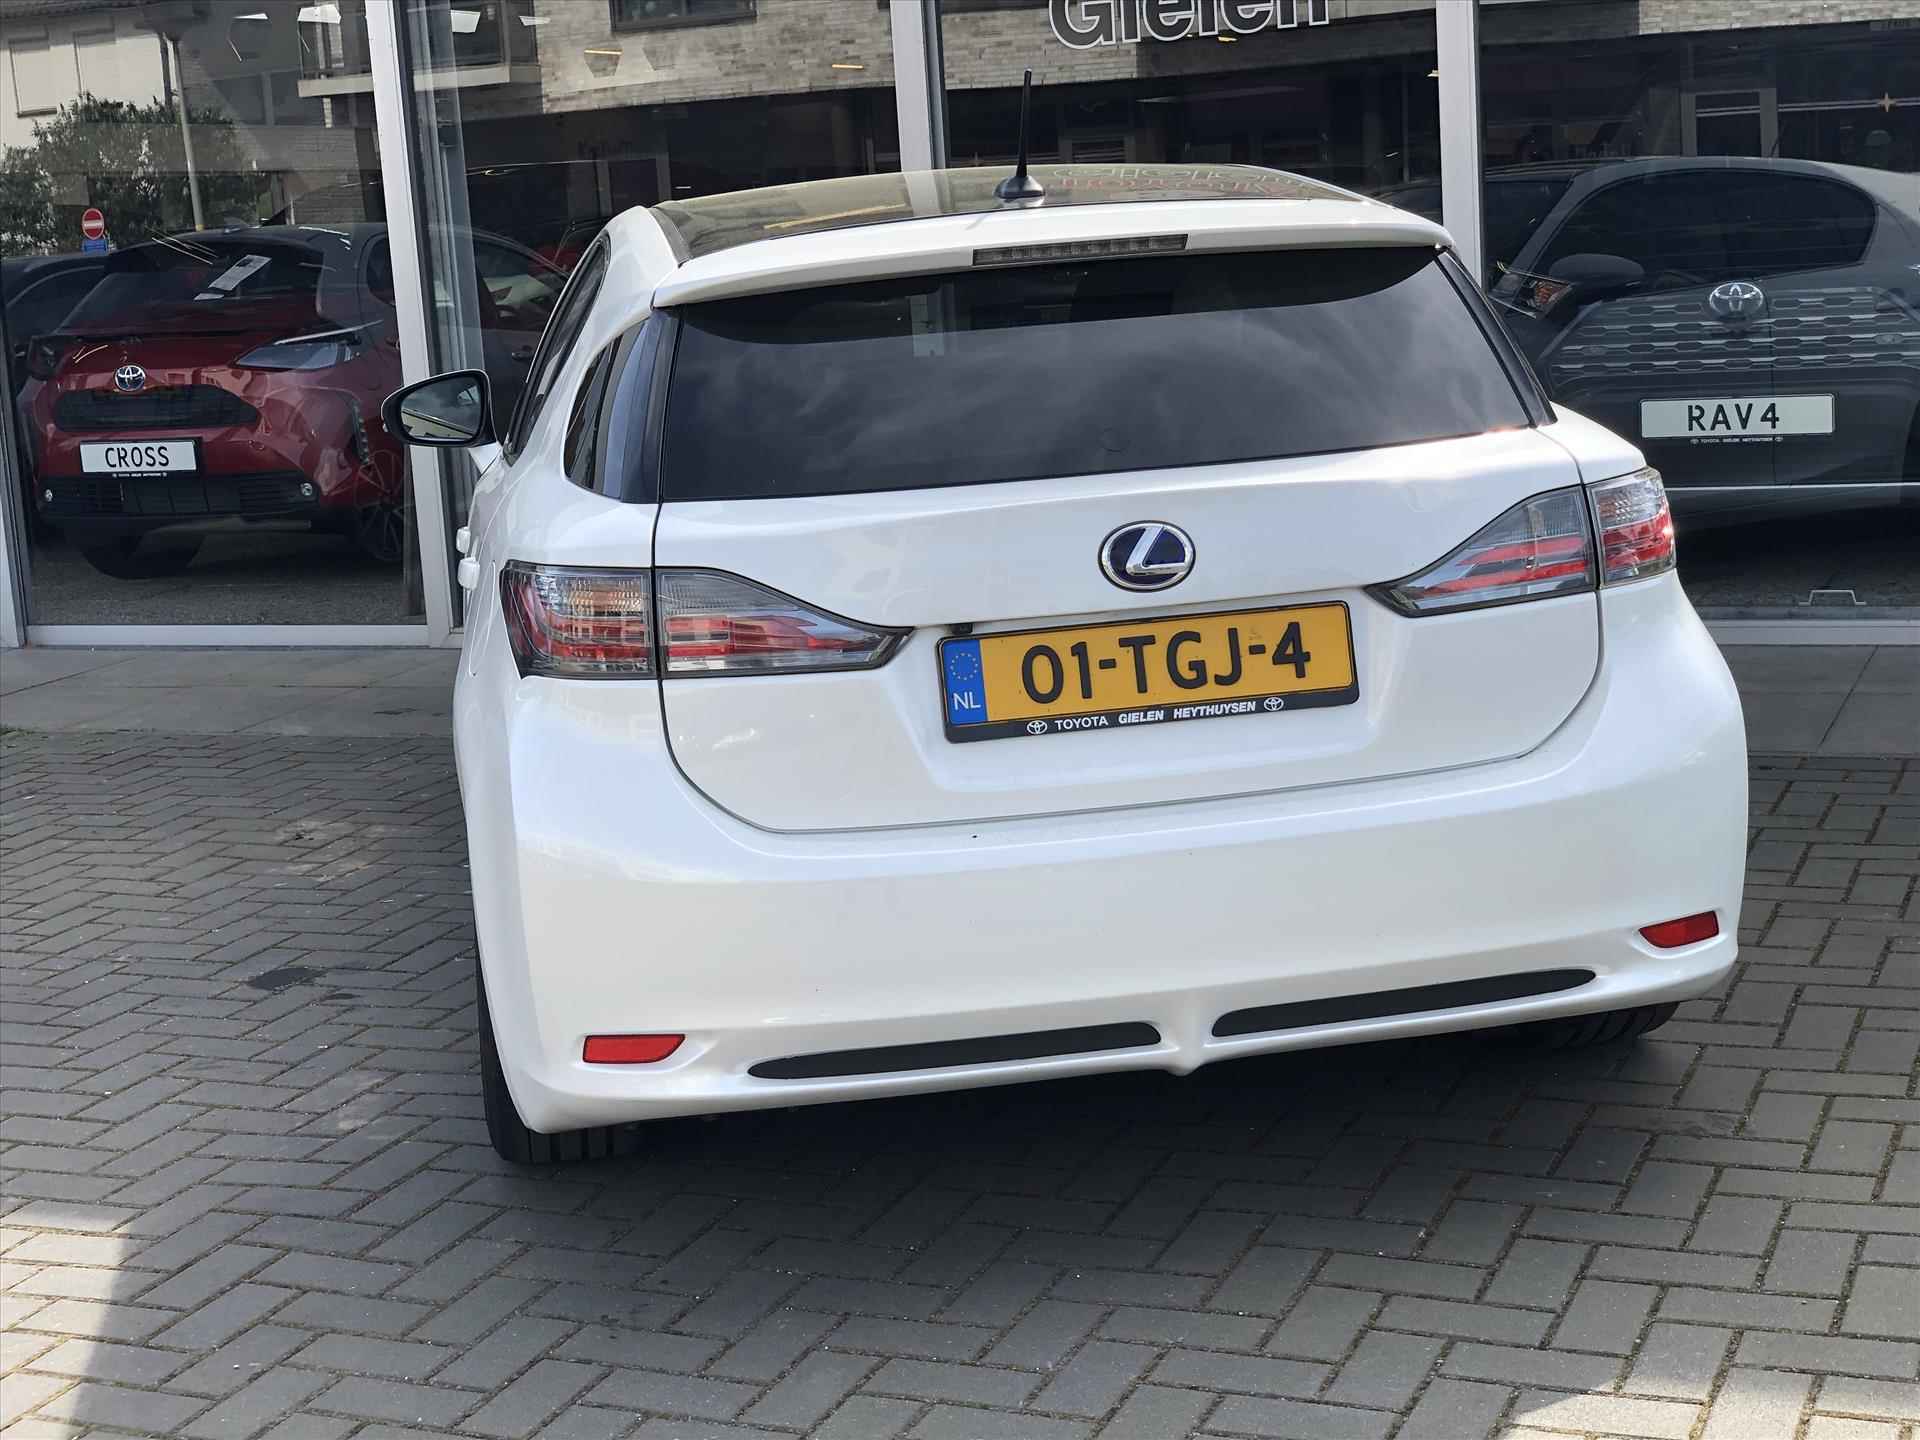 Lexus Ct 200h Business Line Pro F Sport Grill | Parkeercamera, Keyless, Cruise control, 18 inch, Privacy Glass, Zeer compleet! - 12/39